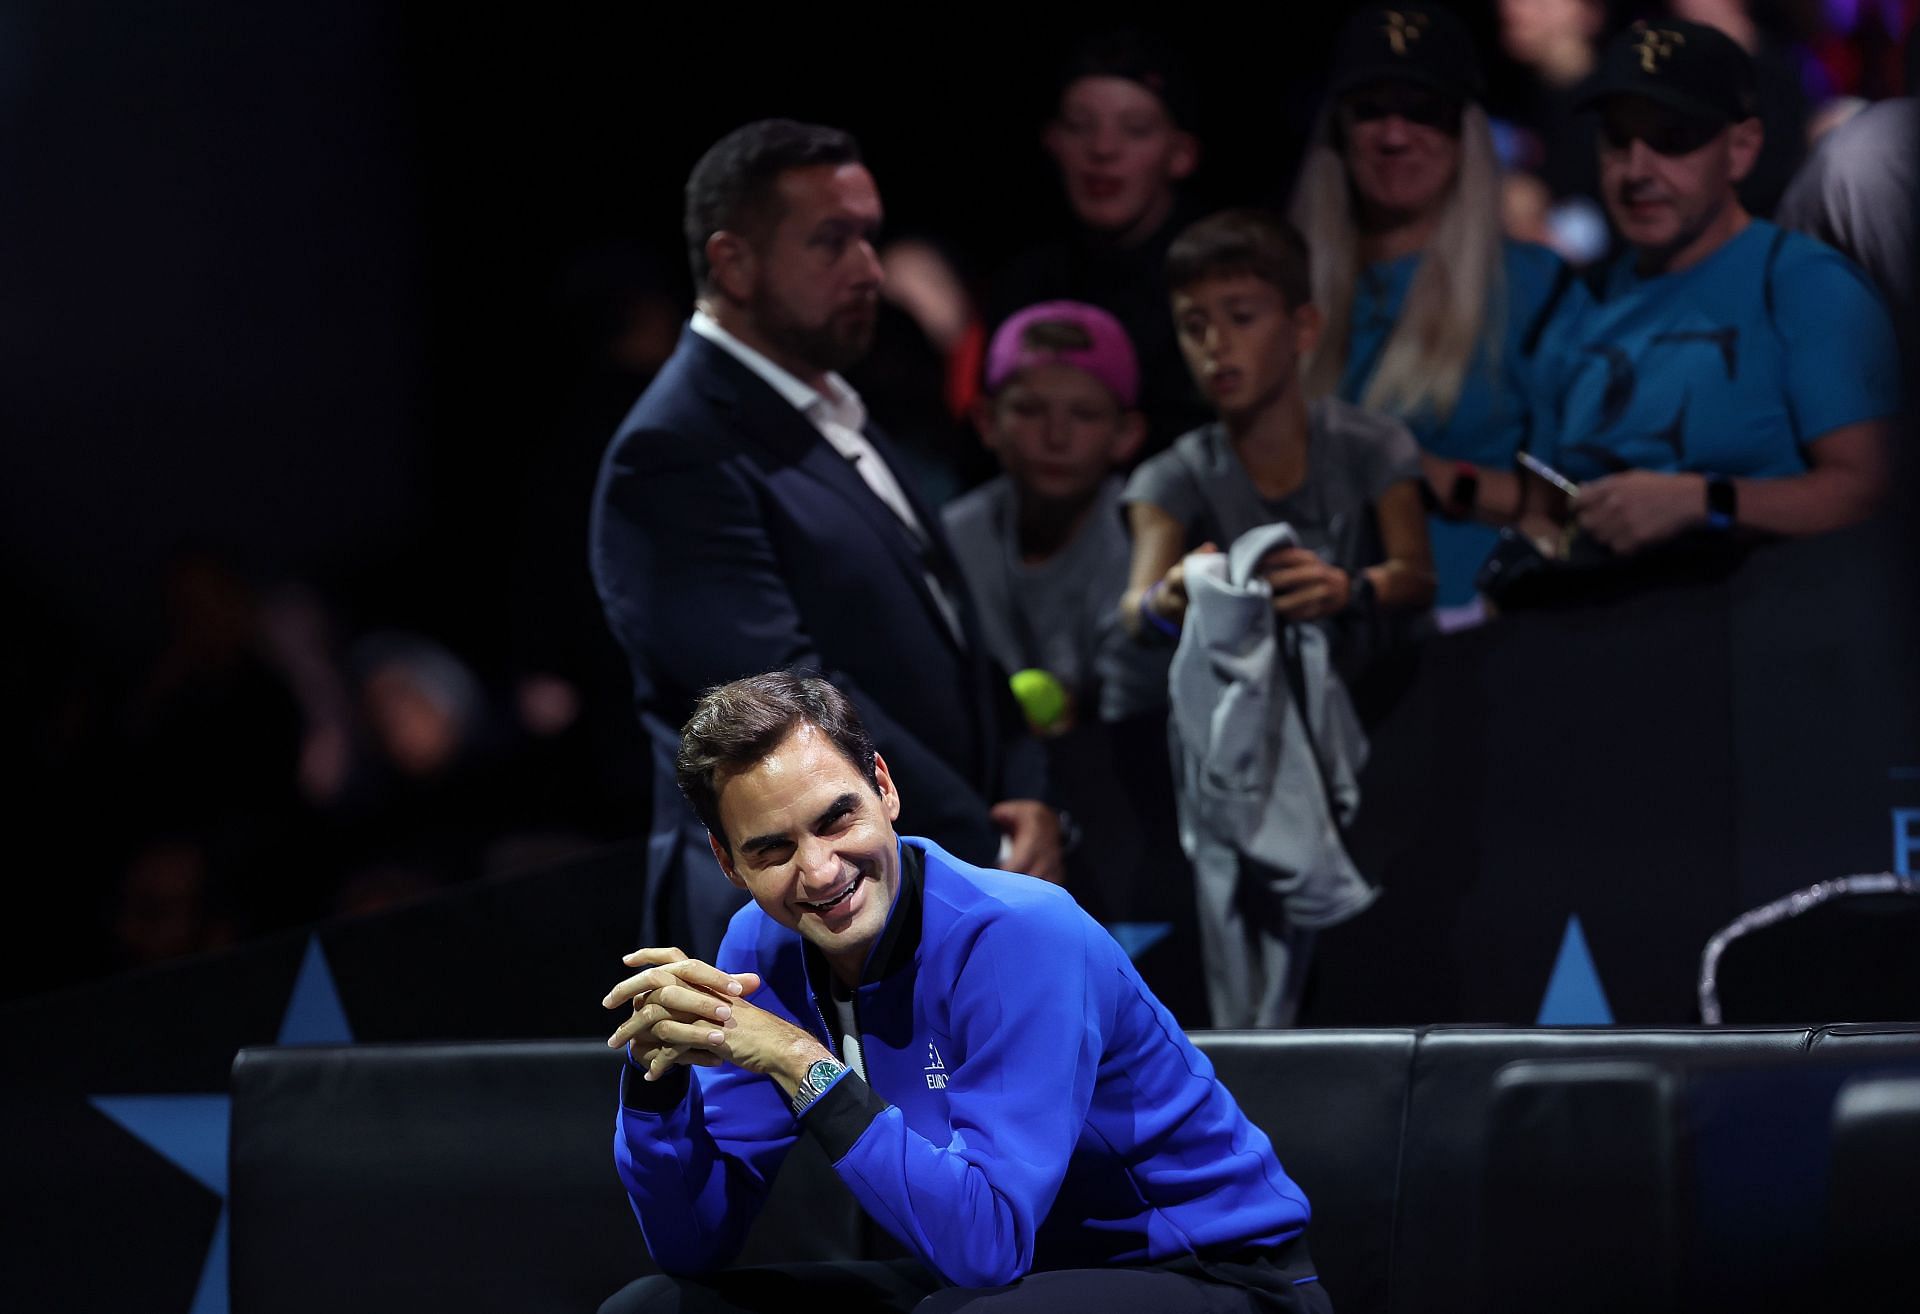 The Swiss tennis superstar at the Laver Cup 2022.